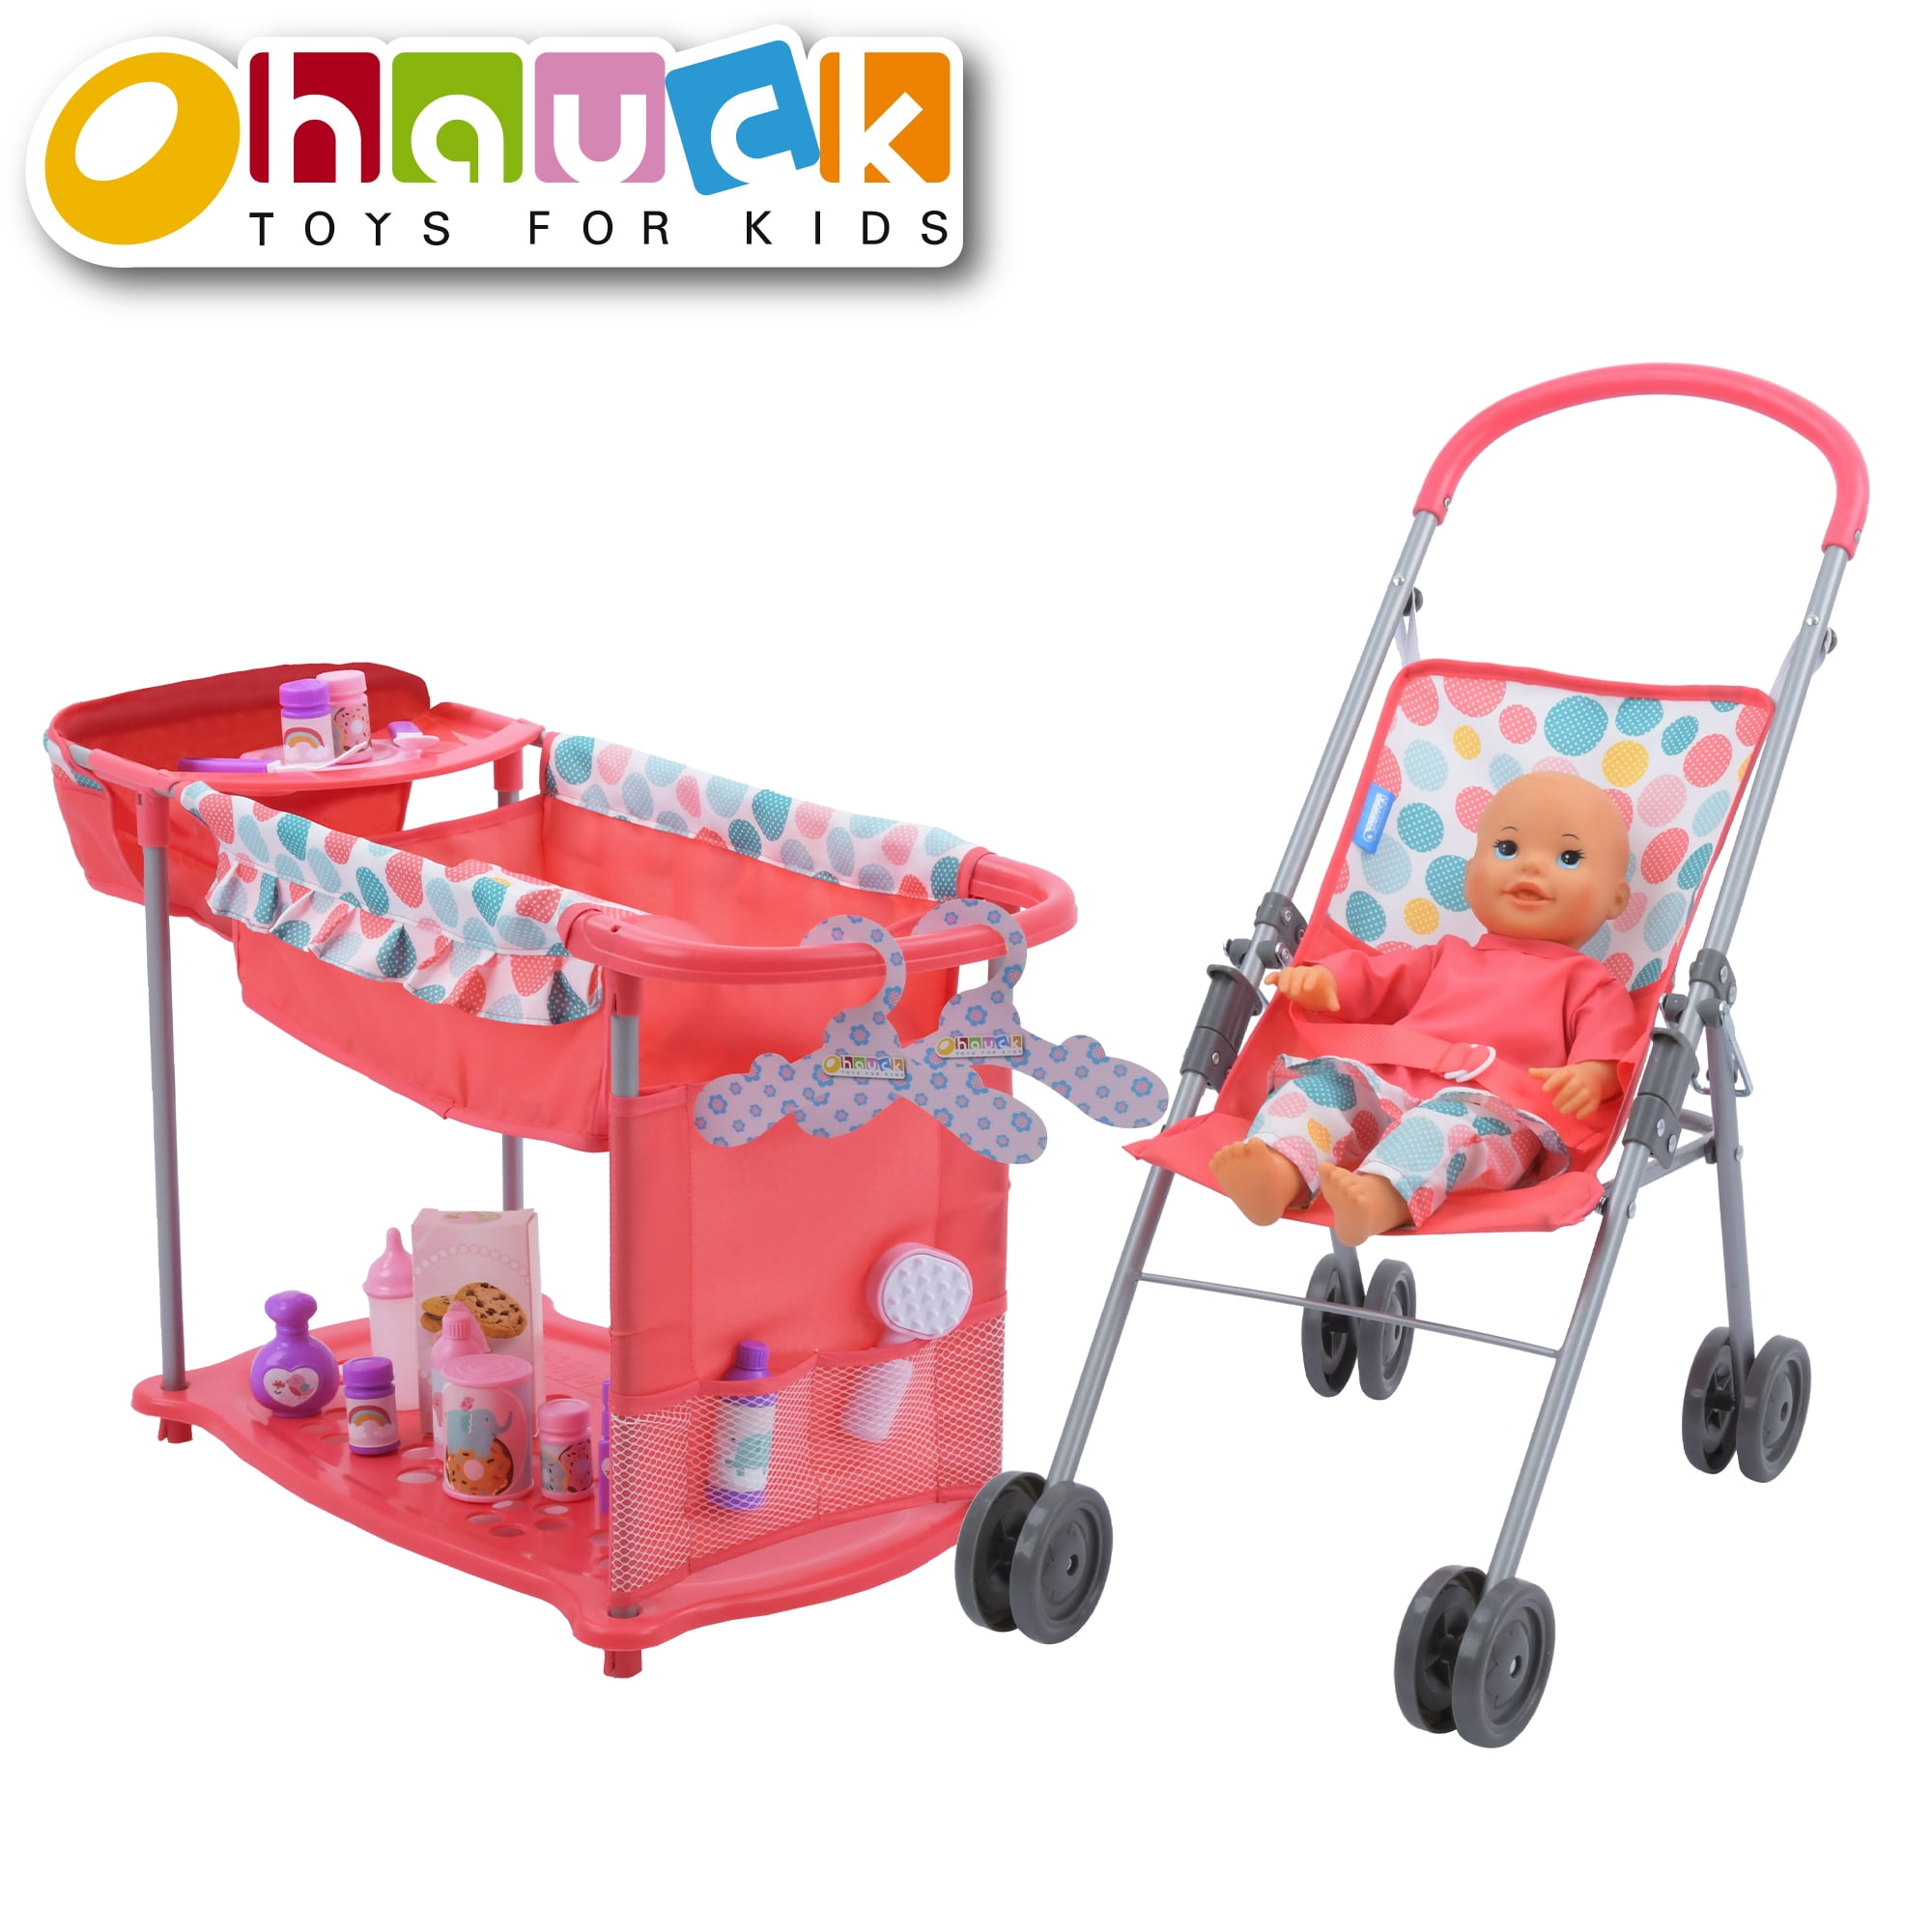 Accessories and Baby Doll with sound. Baby Doll Playset with Stroller 